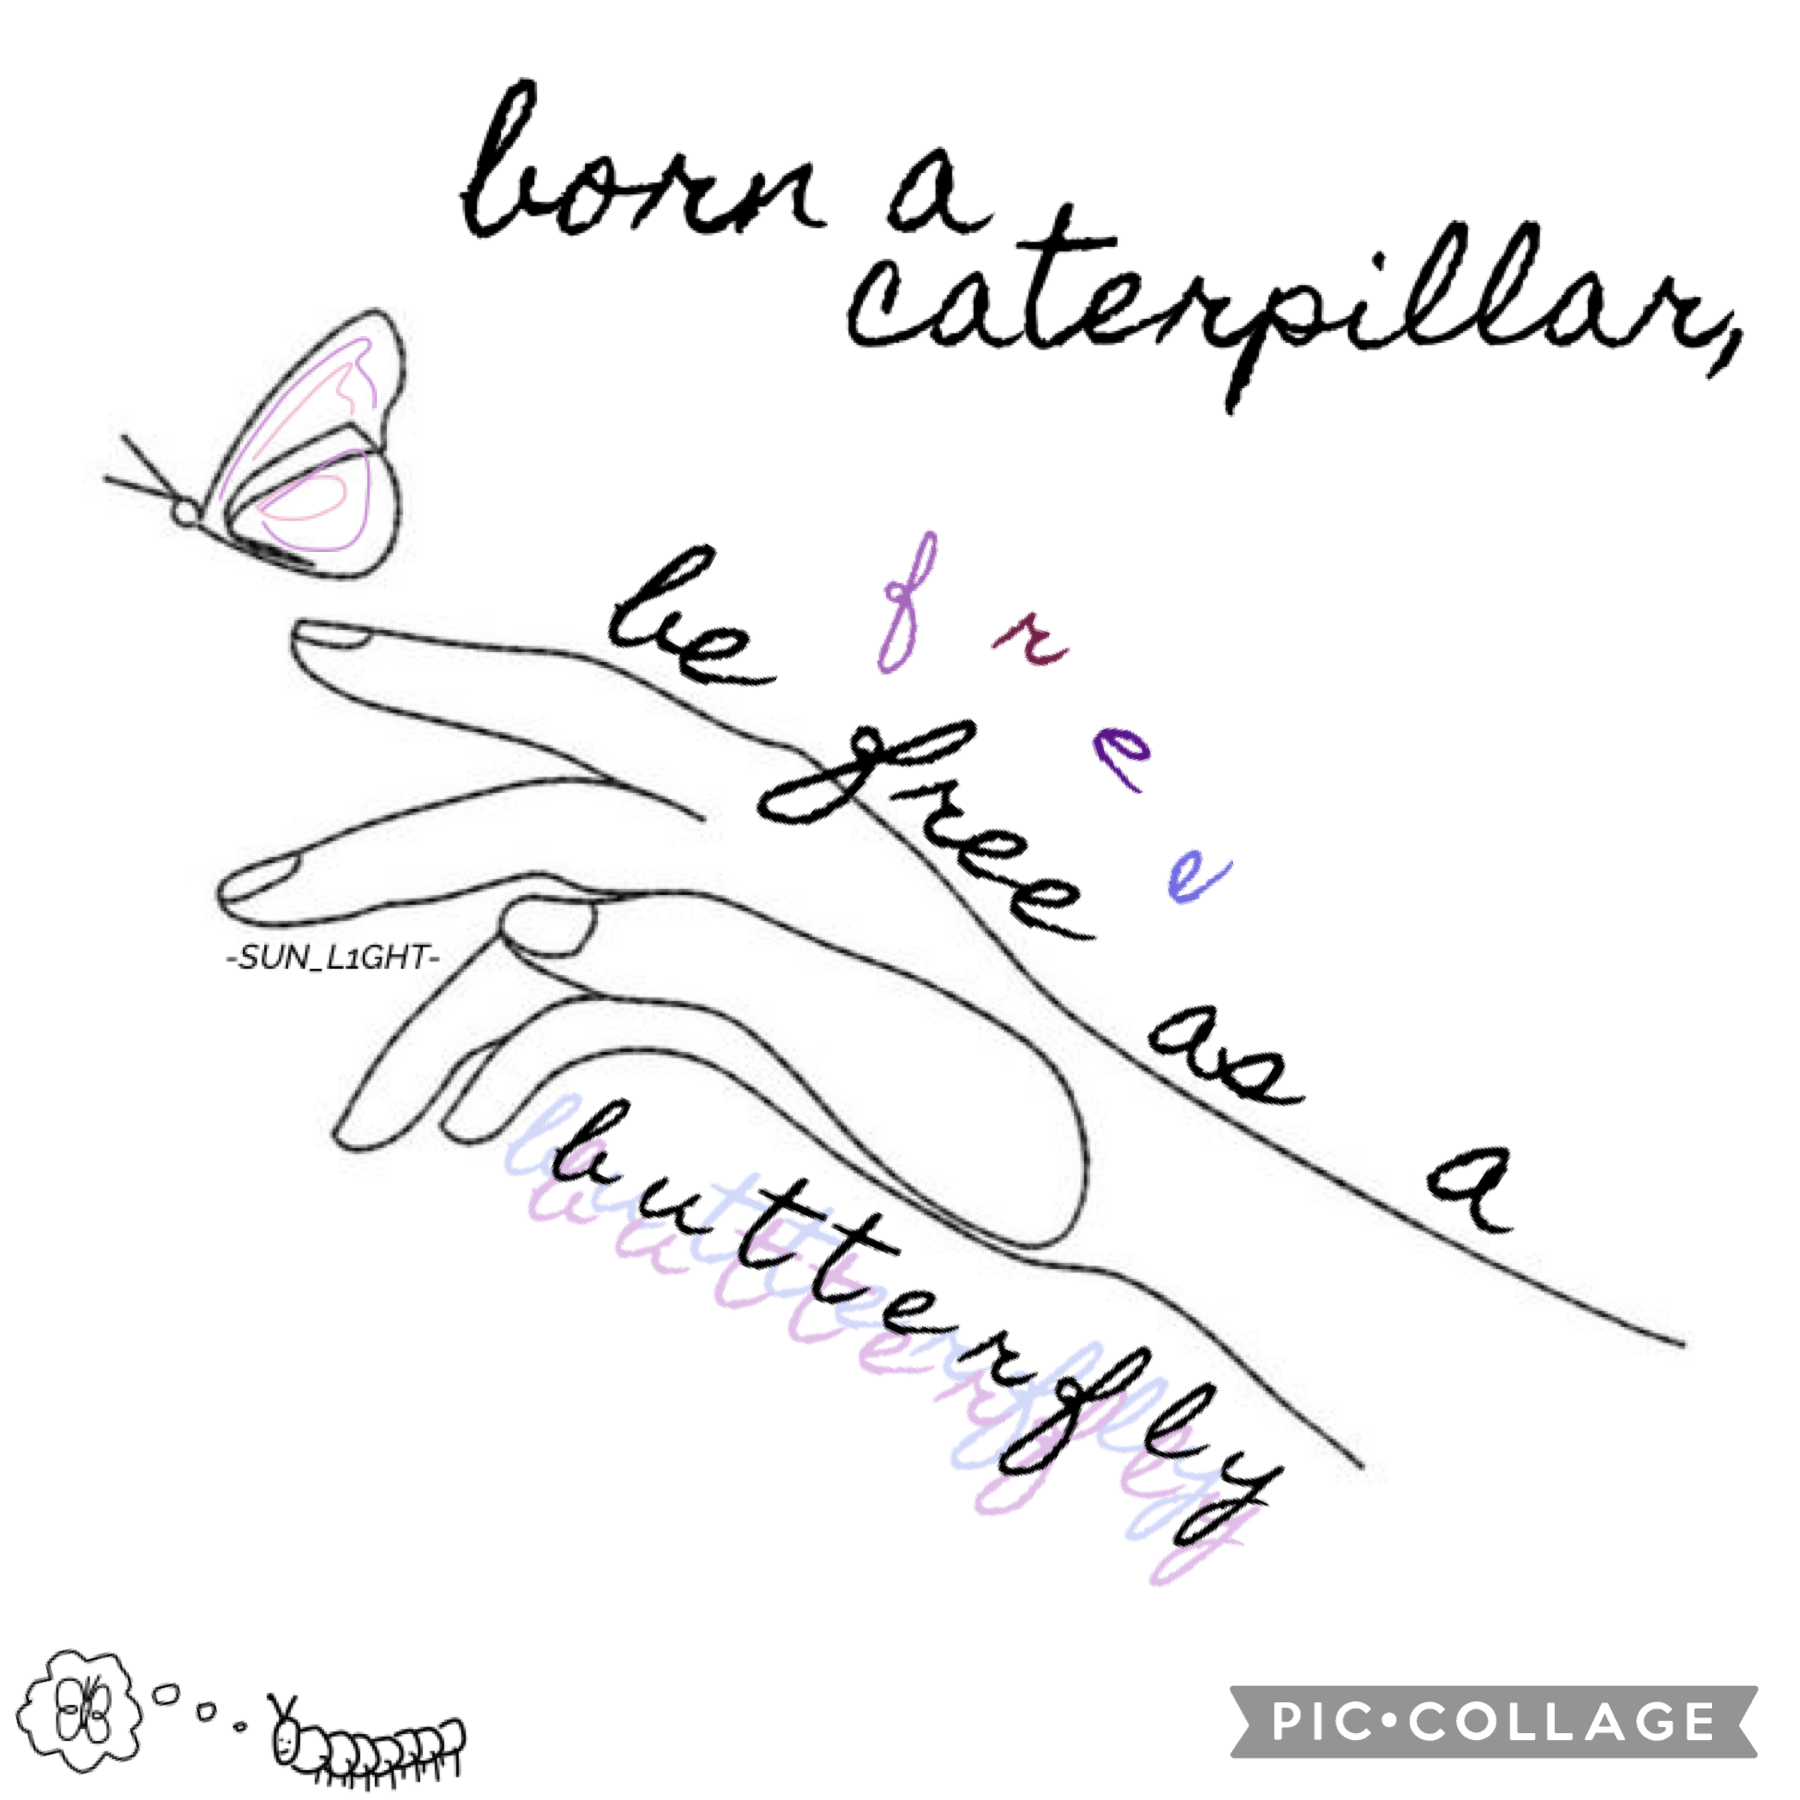 tap to see the caterpillar transform > 🐛>>
🥐🦋
(^croissant = cocoon ,XD)
also a lazy edit :,< I’m currently very stressed for exams (send help :,>)
•^• ¿ɓuıoɓ n ɹ ʍoɥ
11•10•21